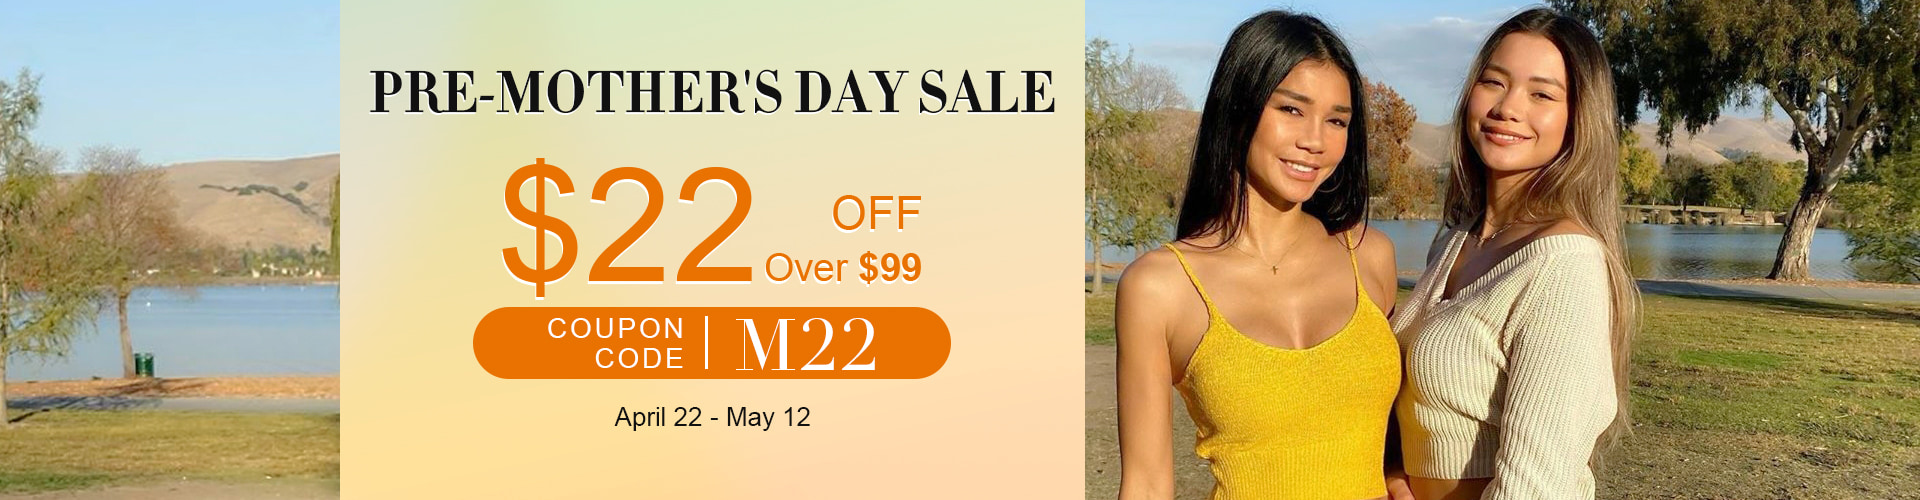 PRE-MOTHER'S DAY SALE